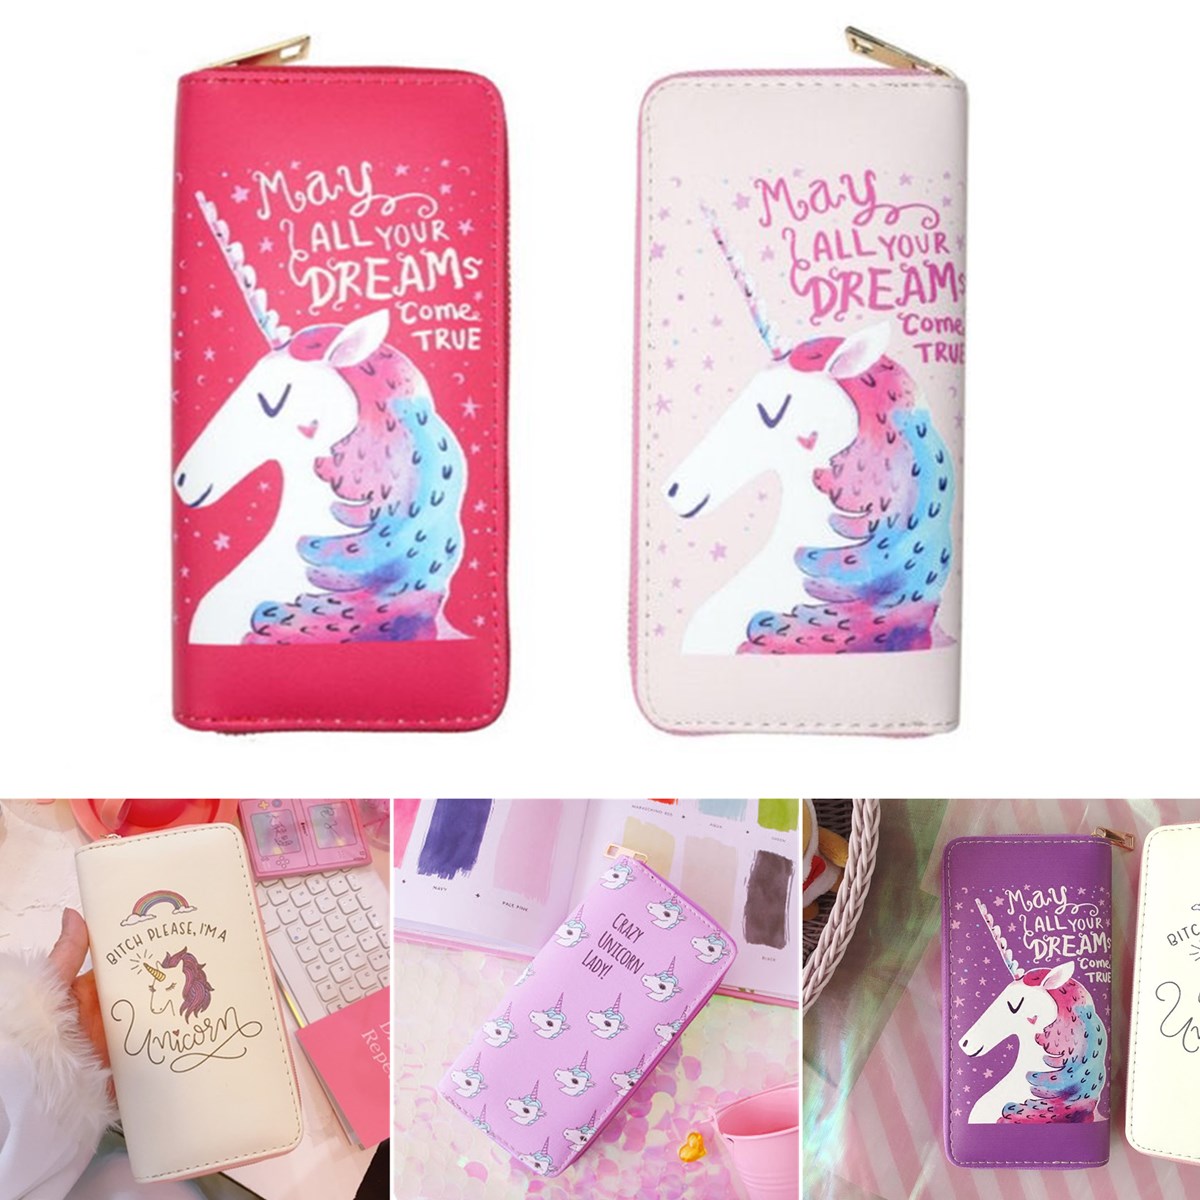 Universal-Colorful-Zipper-Bag-Unicorn-Phone-Wallet-Purse-for-Phone-Under-55-inches-1226486-1